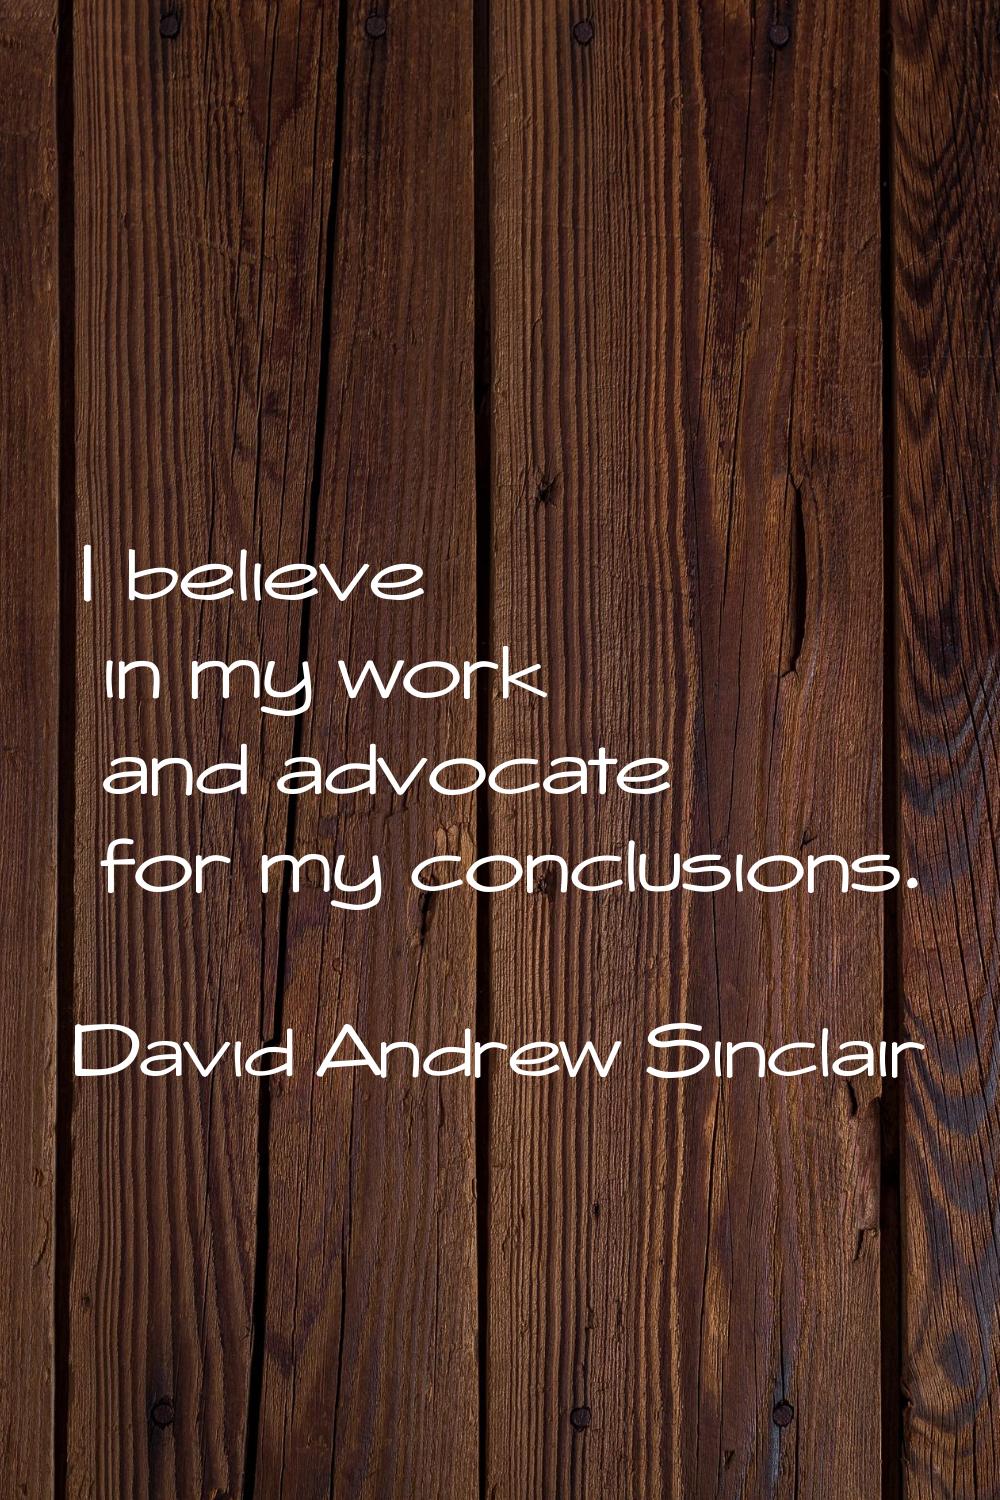 I believe in my work and advocate for my conclusions.